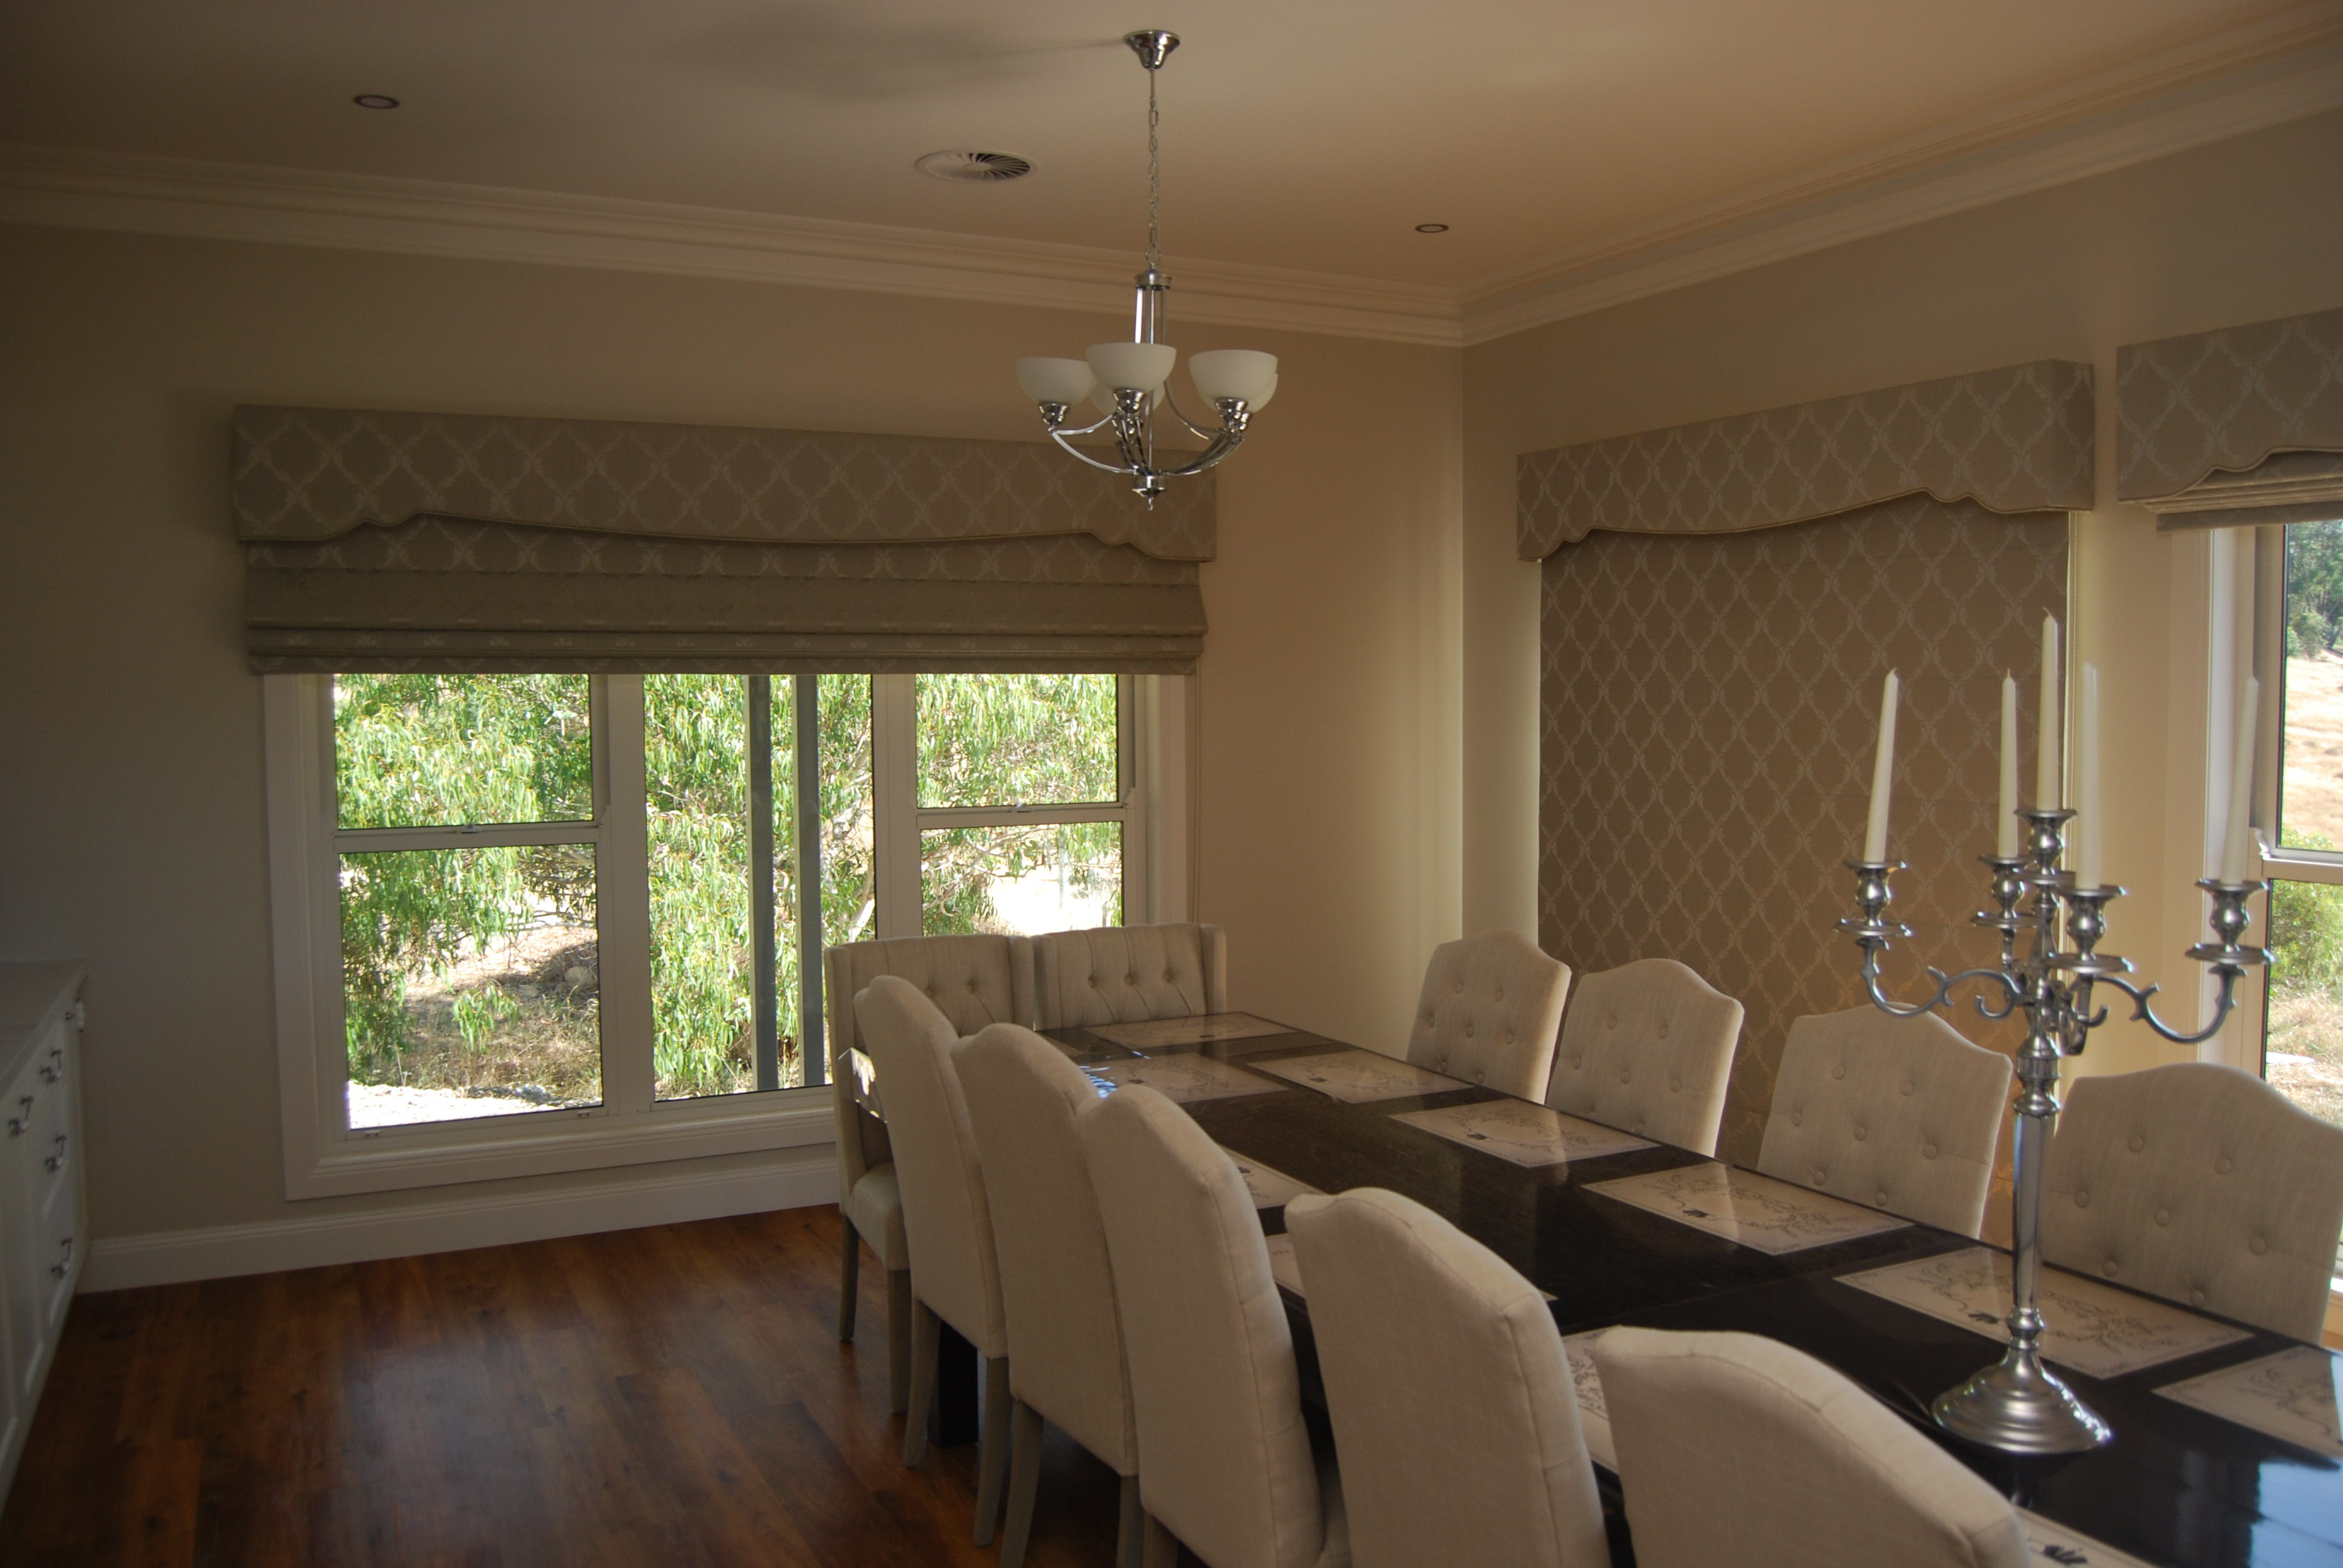 Soft Roman Blinds with Pelmets in Dining Room_0.JPG